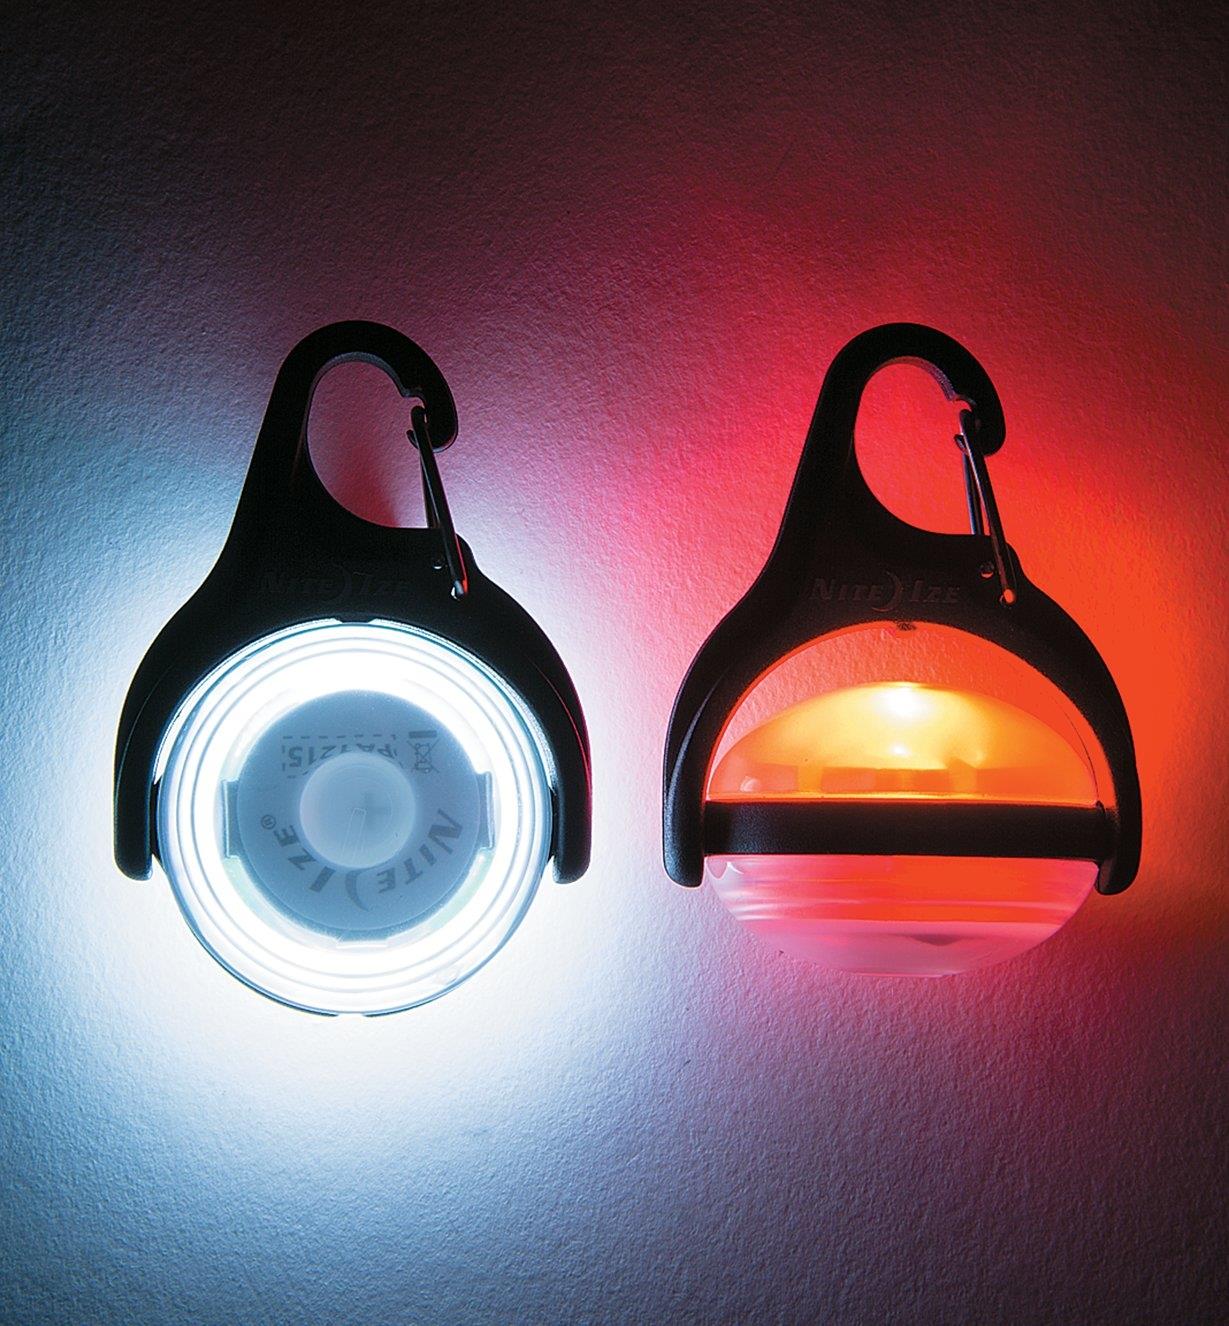 Two pivoting Carabiner LED Lights, shown in line with and at a right angle to the mount